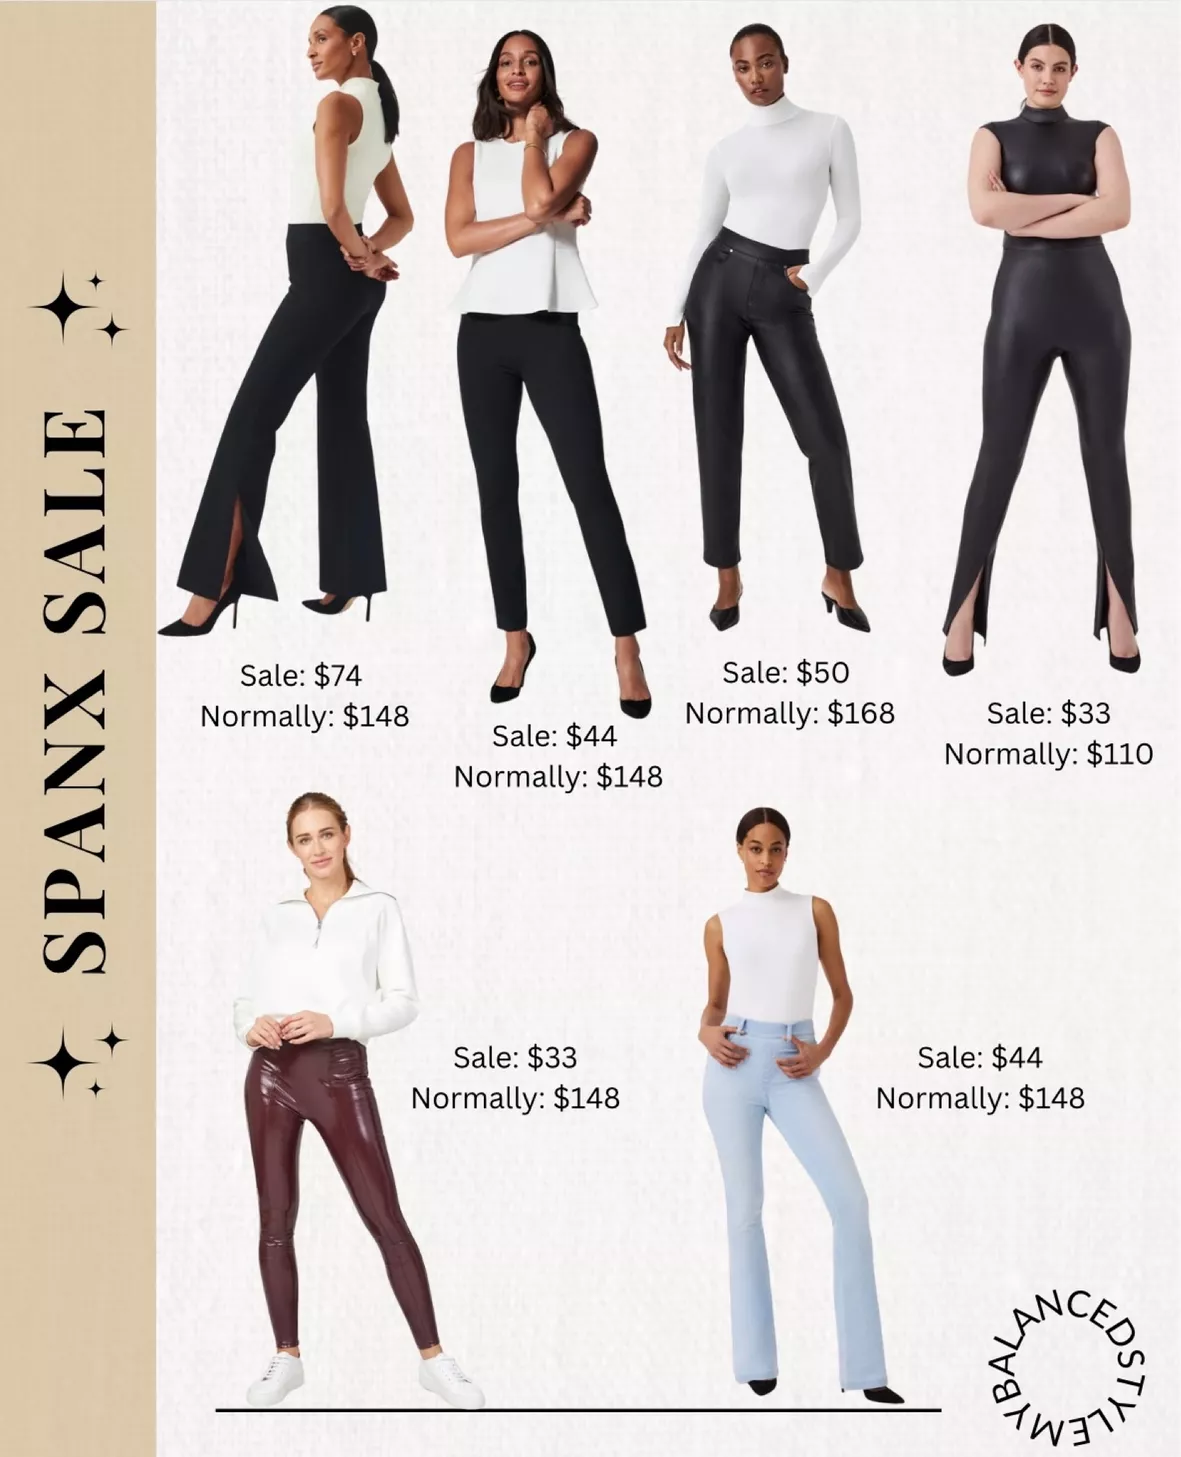 Spanx for Women sale - discounted price